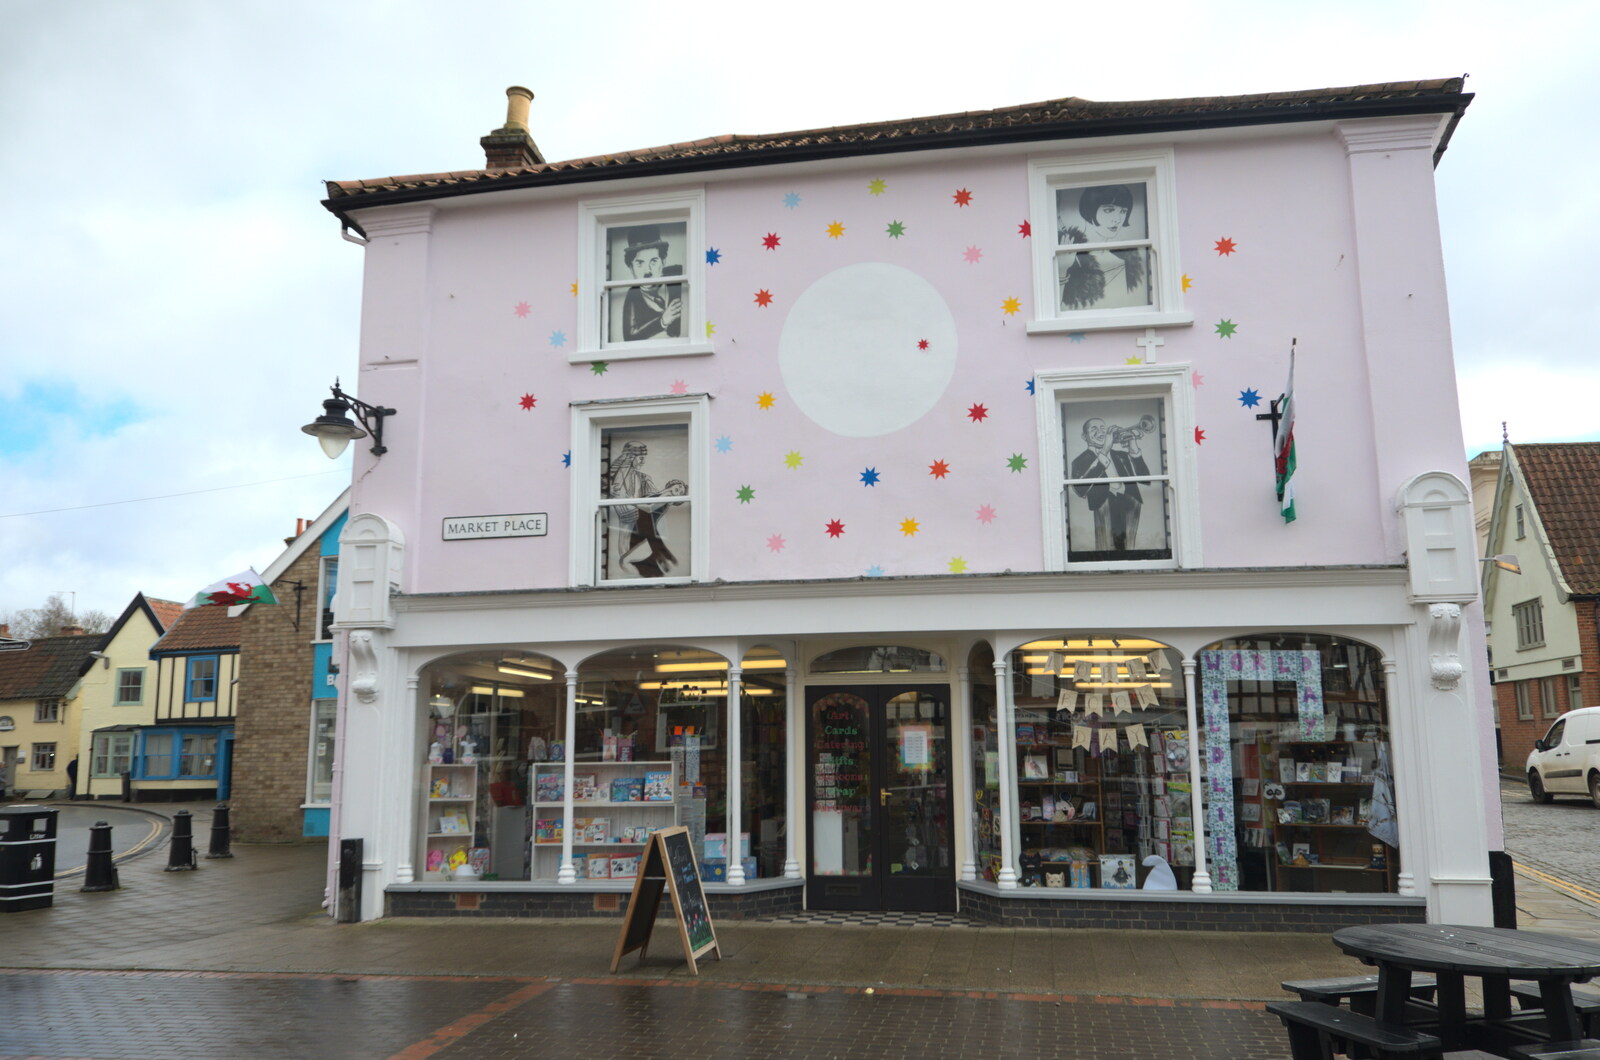 Lunch in Harleston, Norfolk - 1st March 2023: A shop with stars all over it